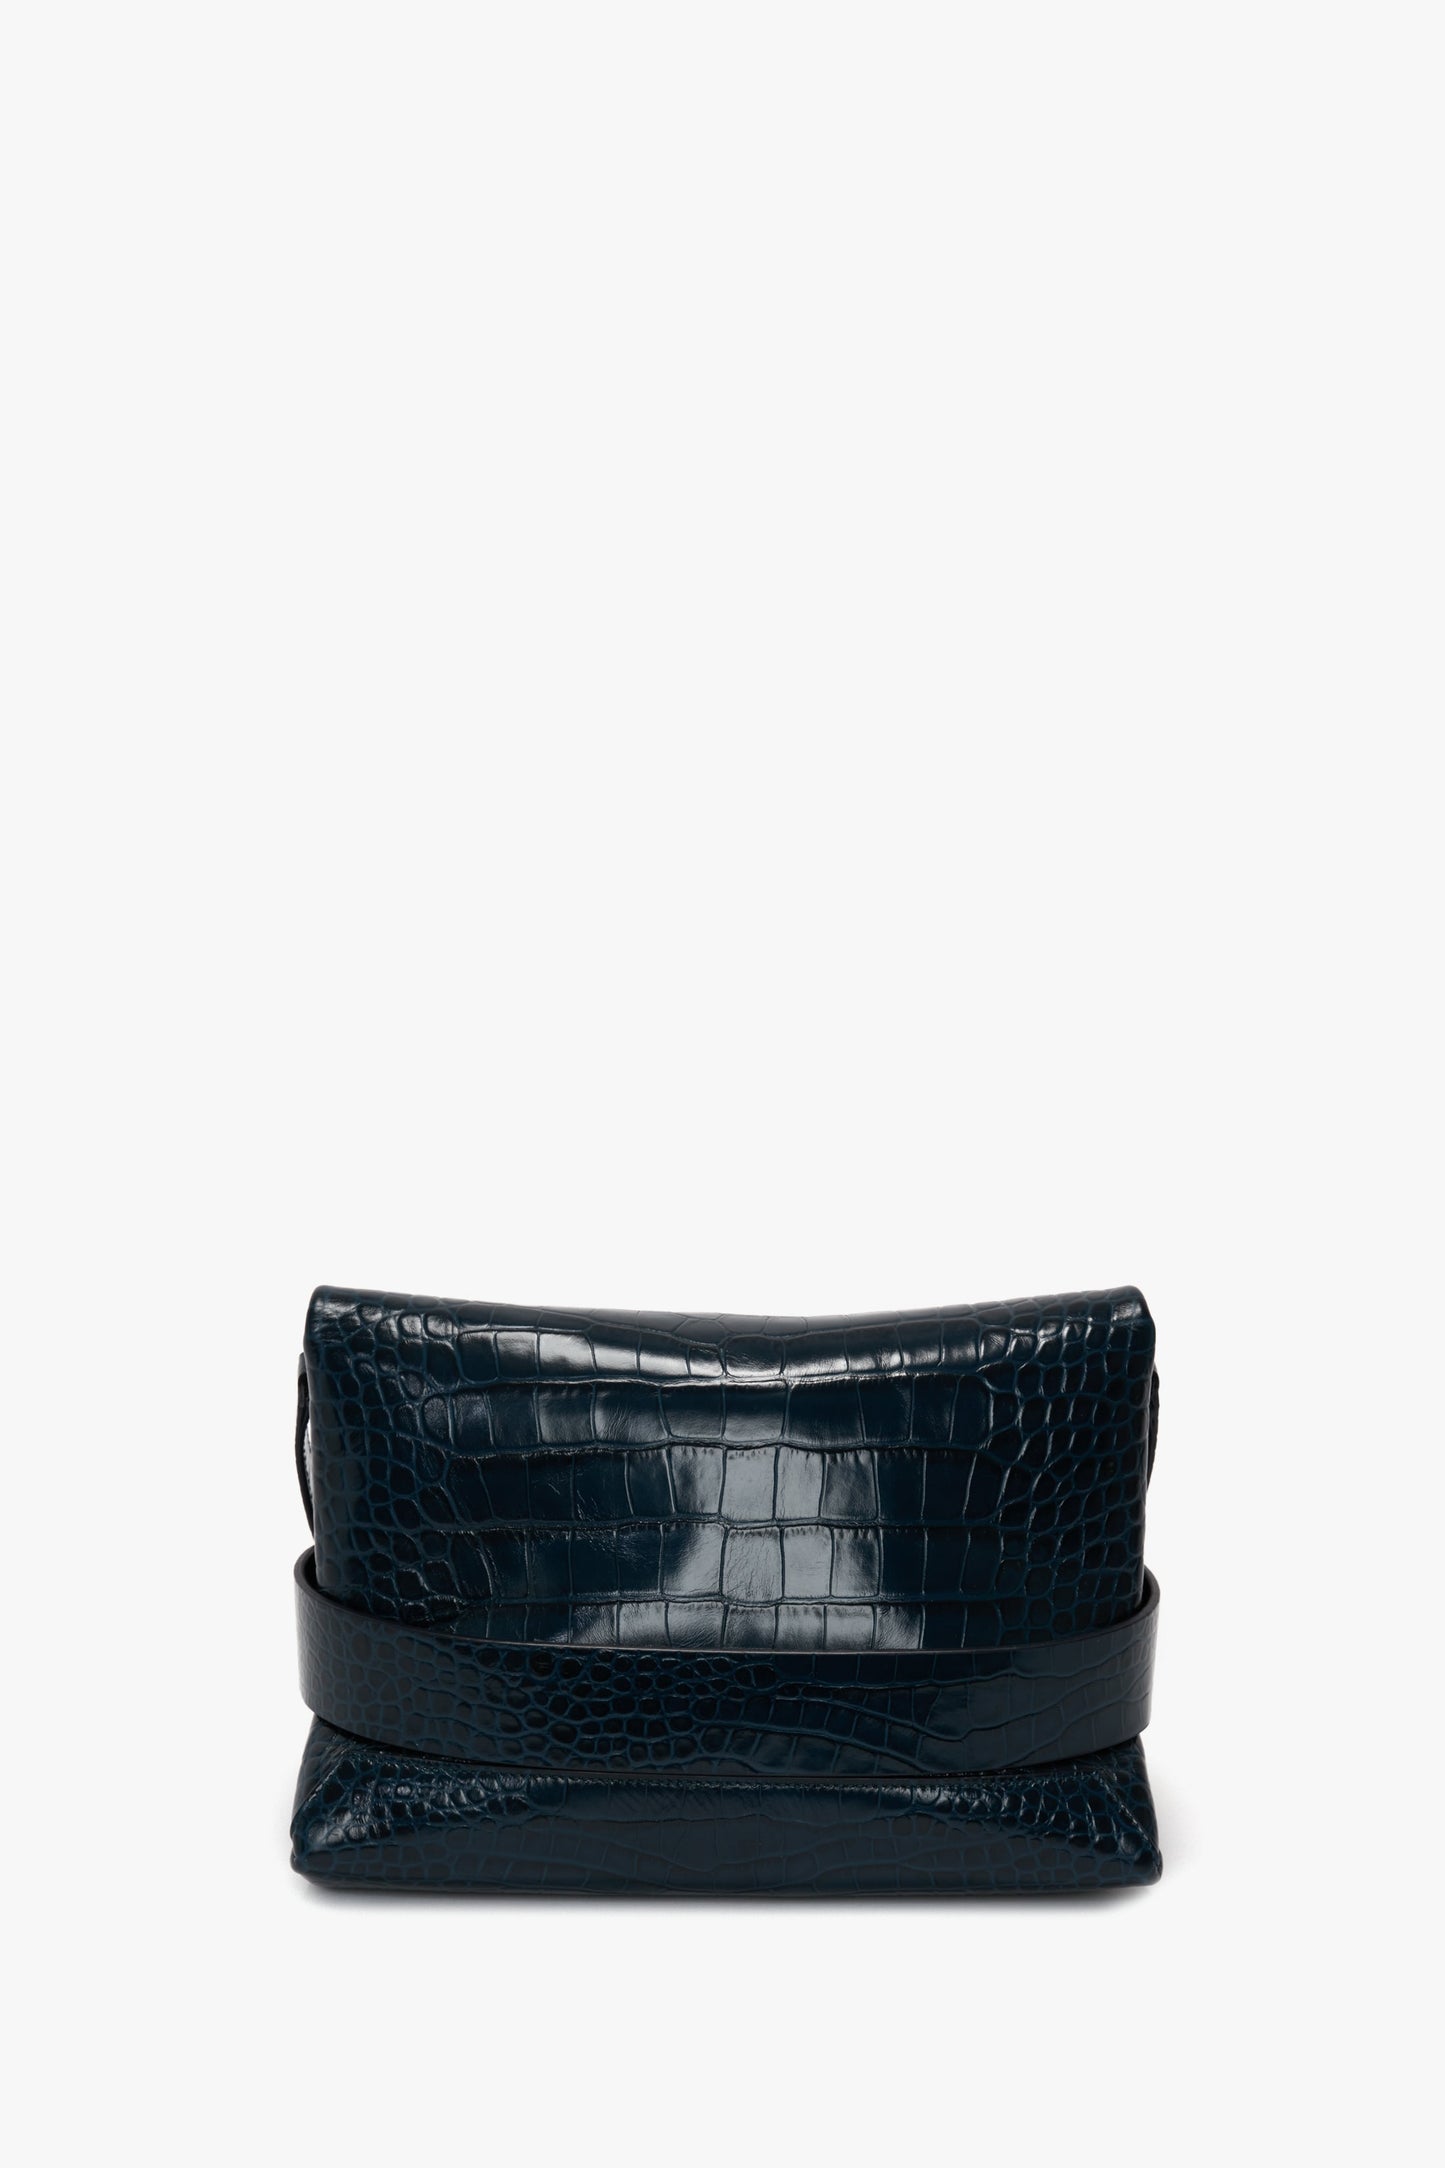 A folded black leather B Pouch Bag In Croc Effect Midnight Blue Leather by Victoria Beckham, displayed against a plain white background.